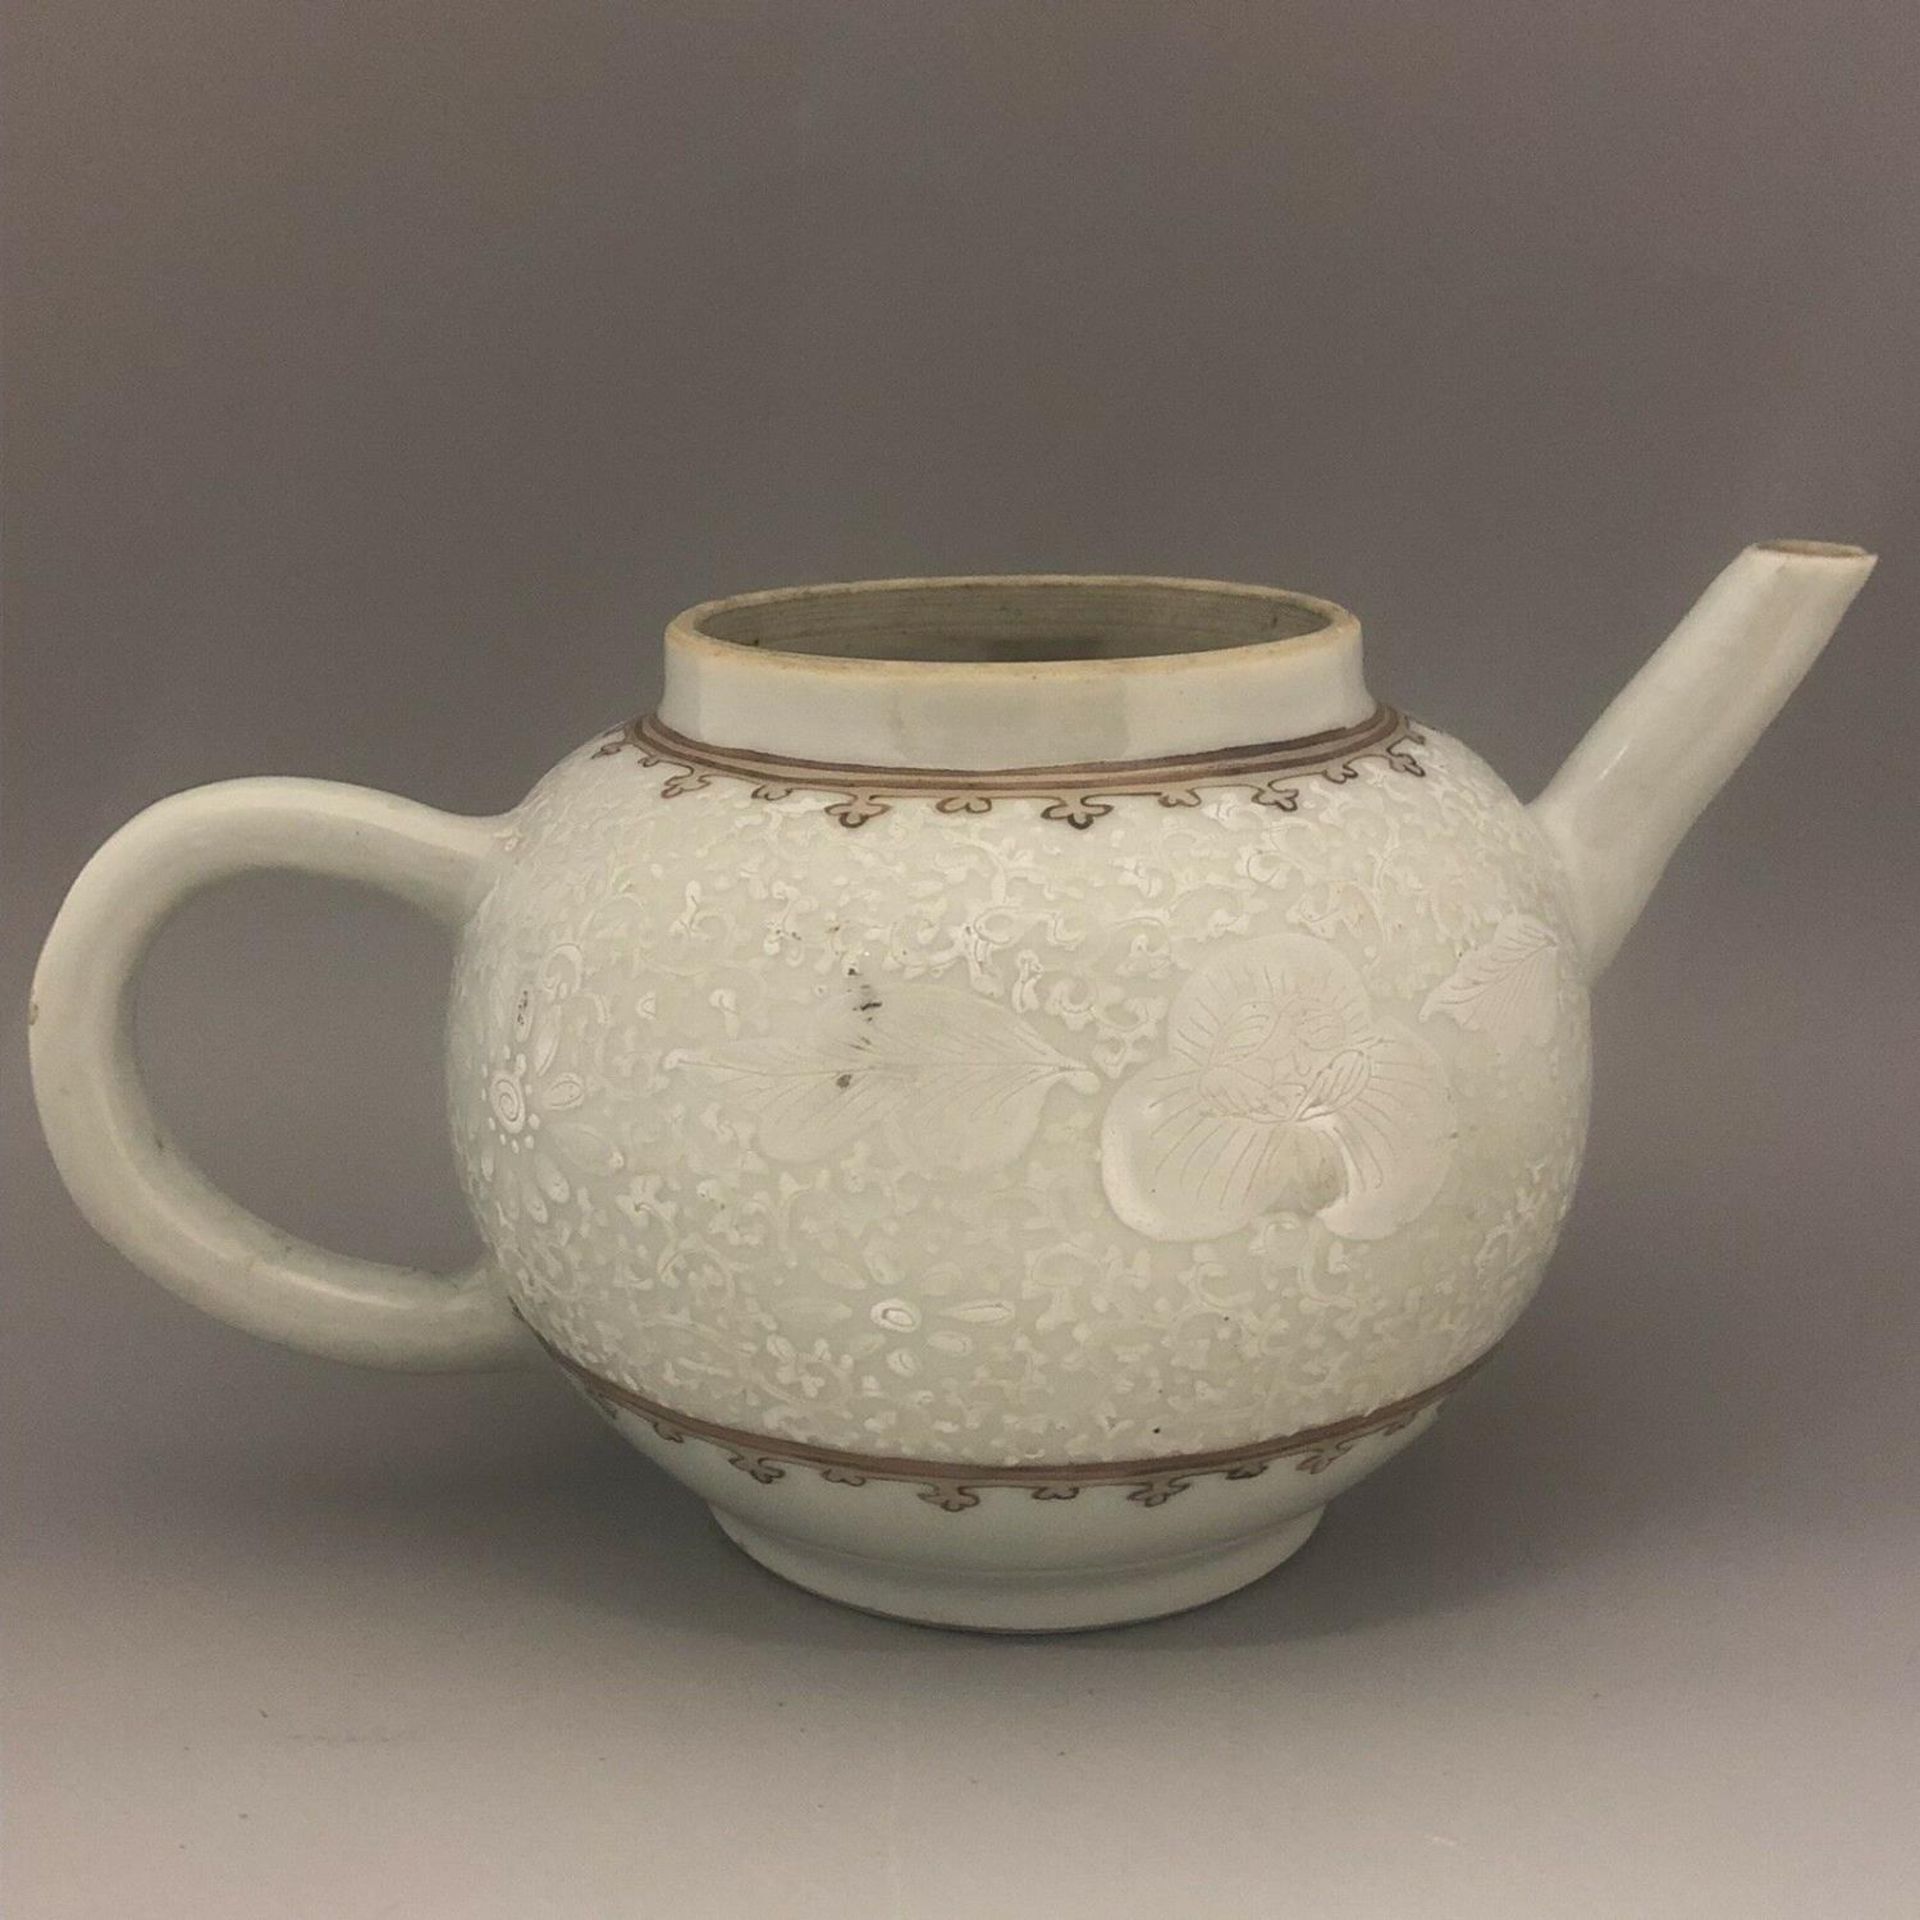 An 18th Century Chinese Bullet Shaped Teapot - Celadon Glaze & Detailed design - Image 3 of 9